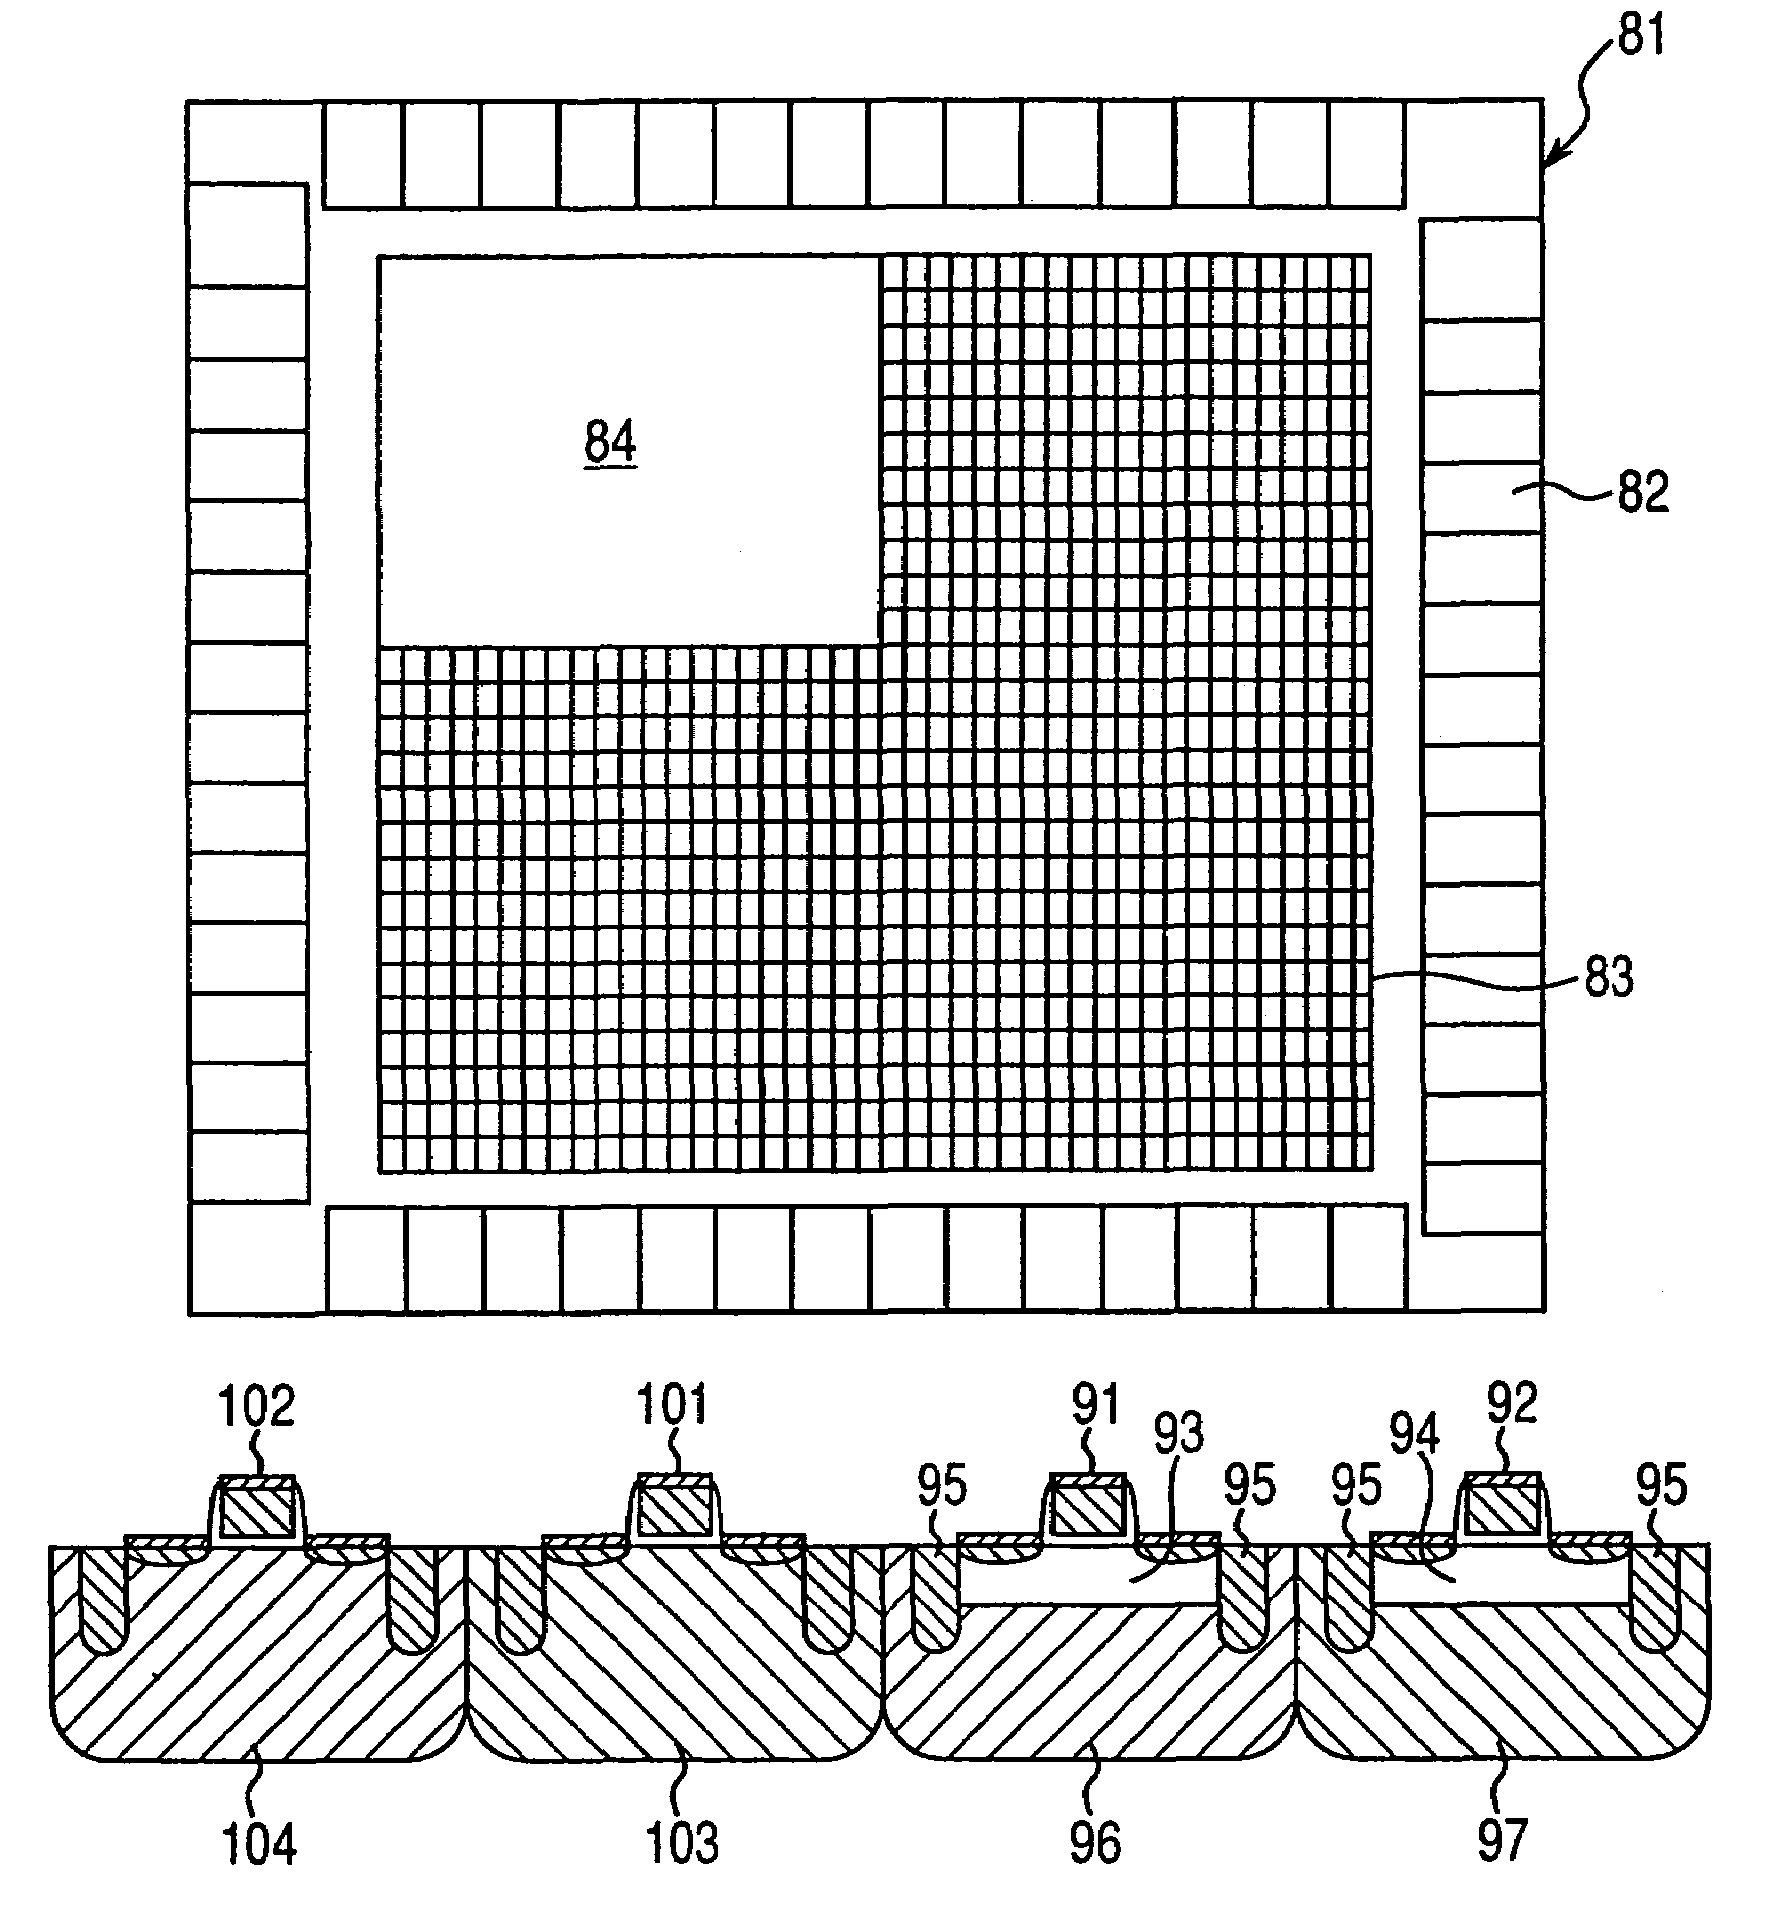 Static random access memory and semiconductor device using MOS transistors having channel region electrically connected with gate